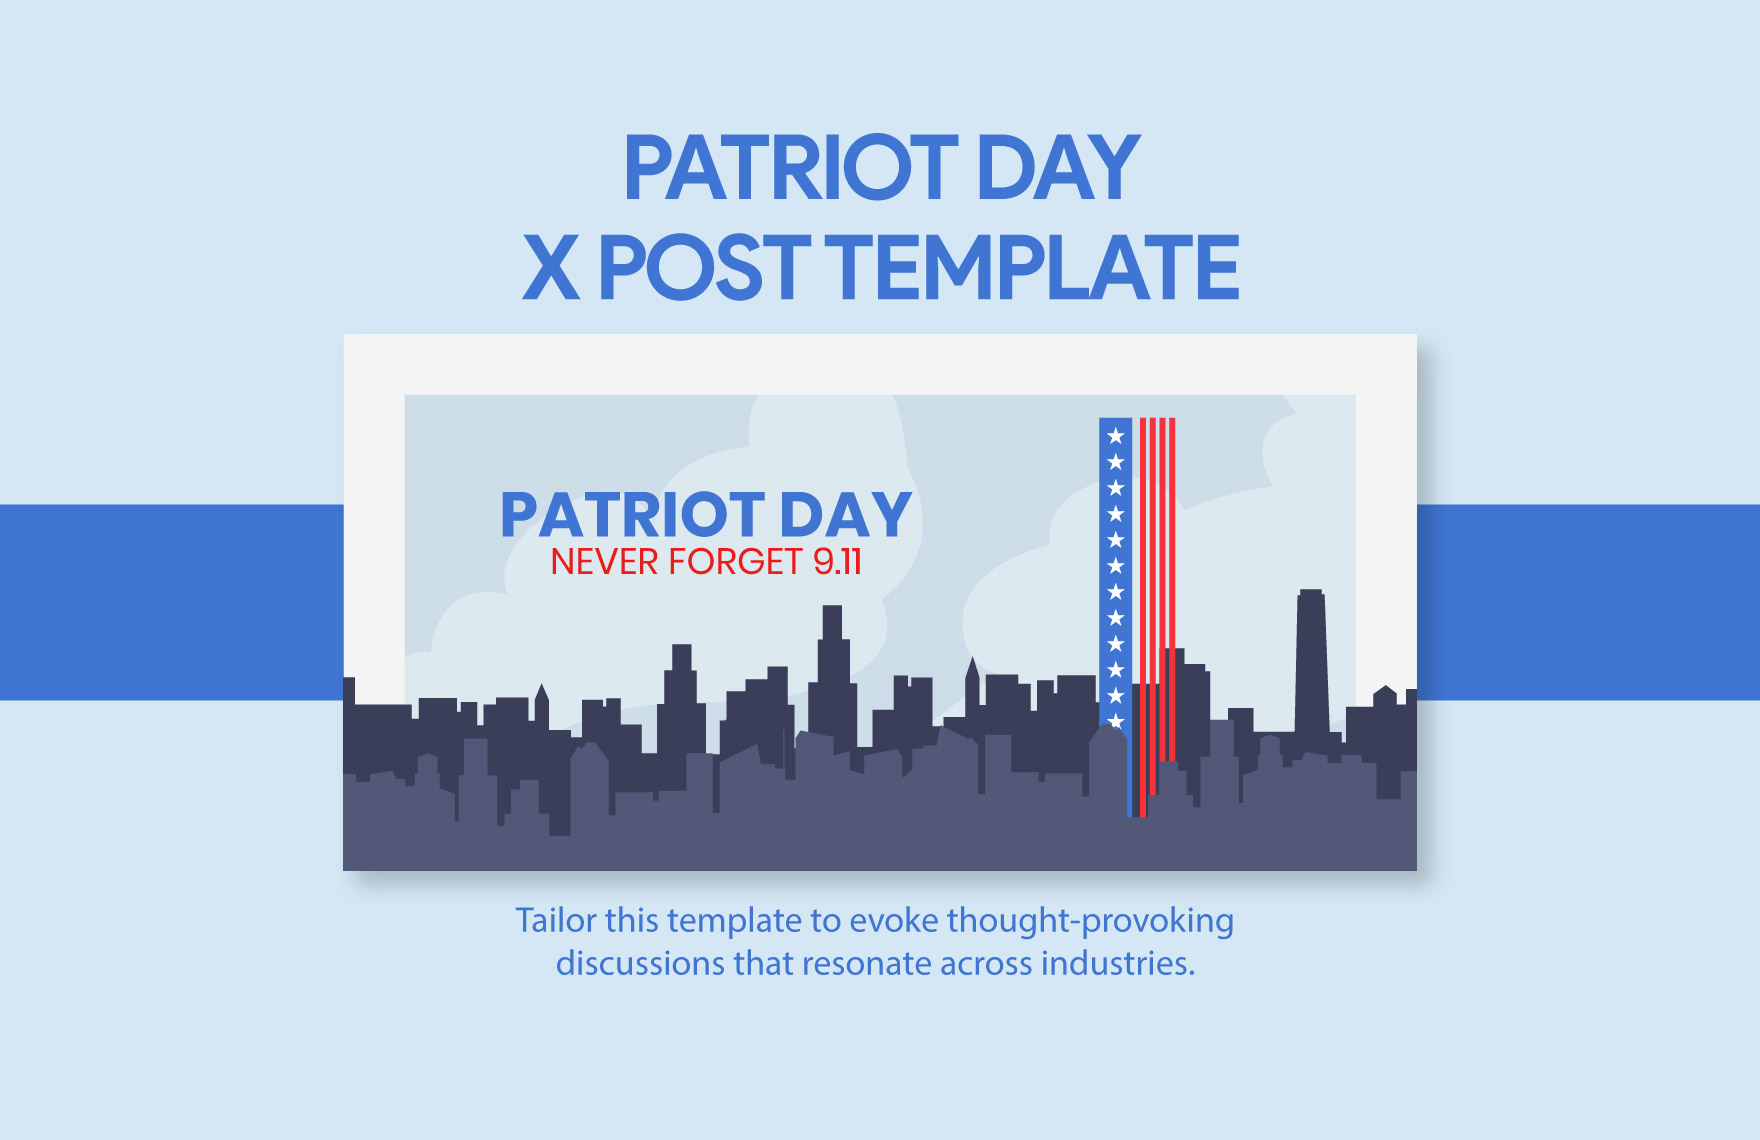 Free Patriot Day X Post Template in Illustrator, PSD, PNG